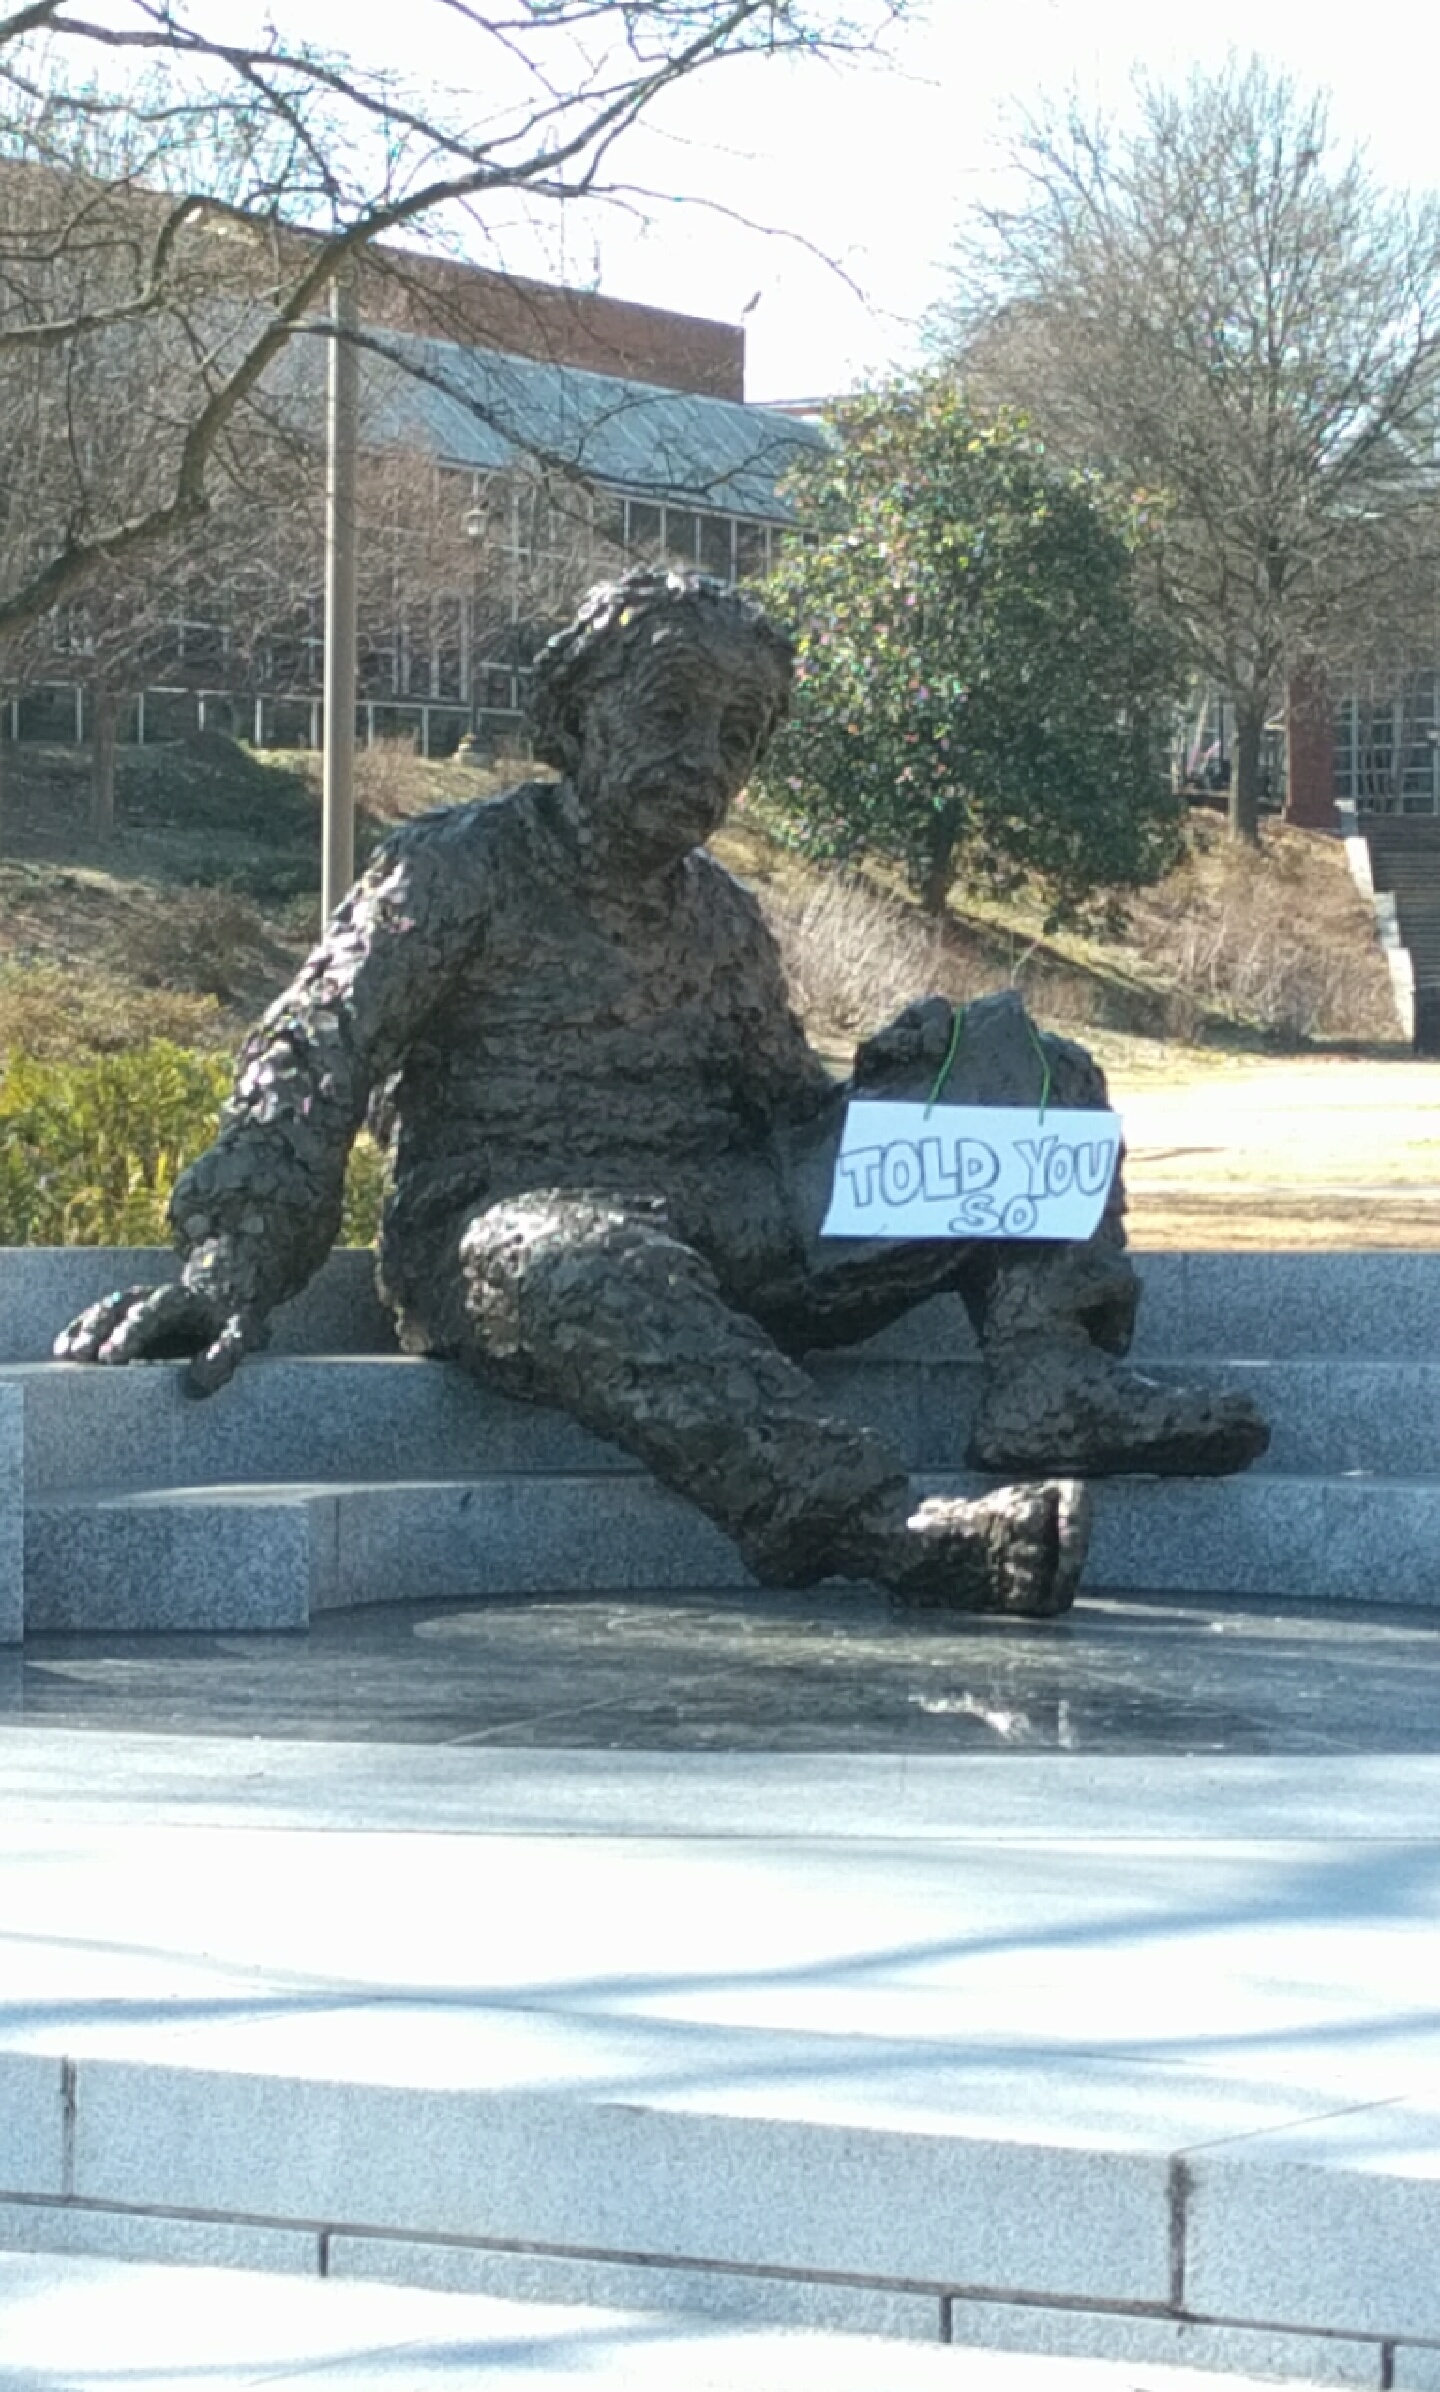 Someone put this sign on the statue of Einstein at Georgia Tech